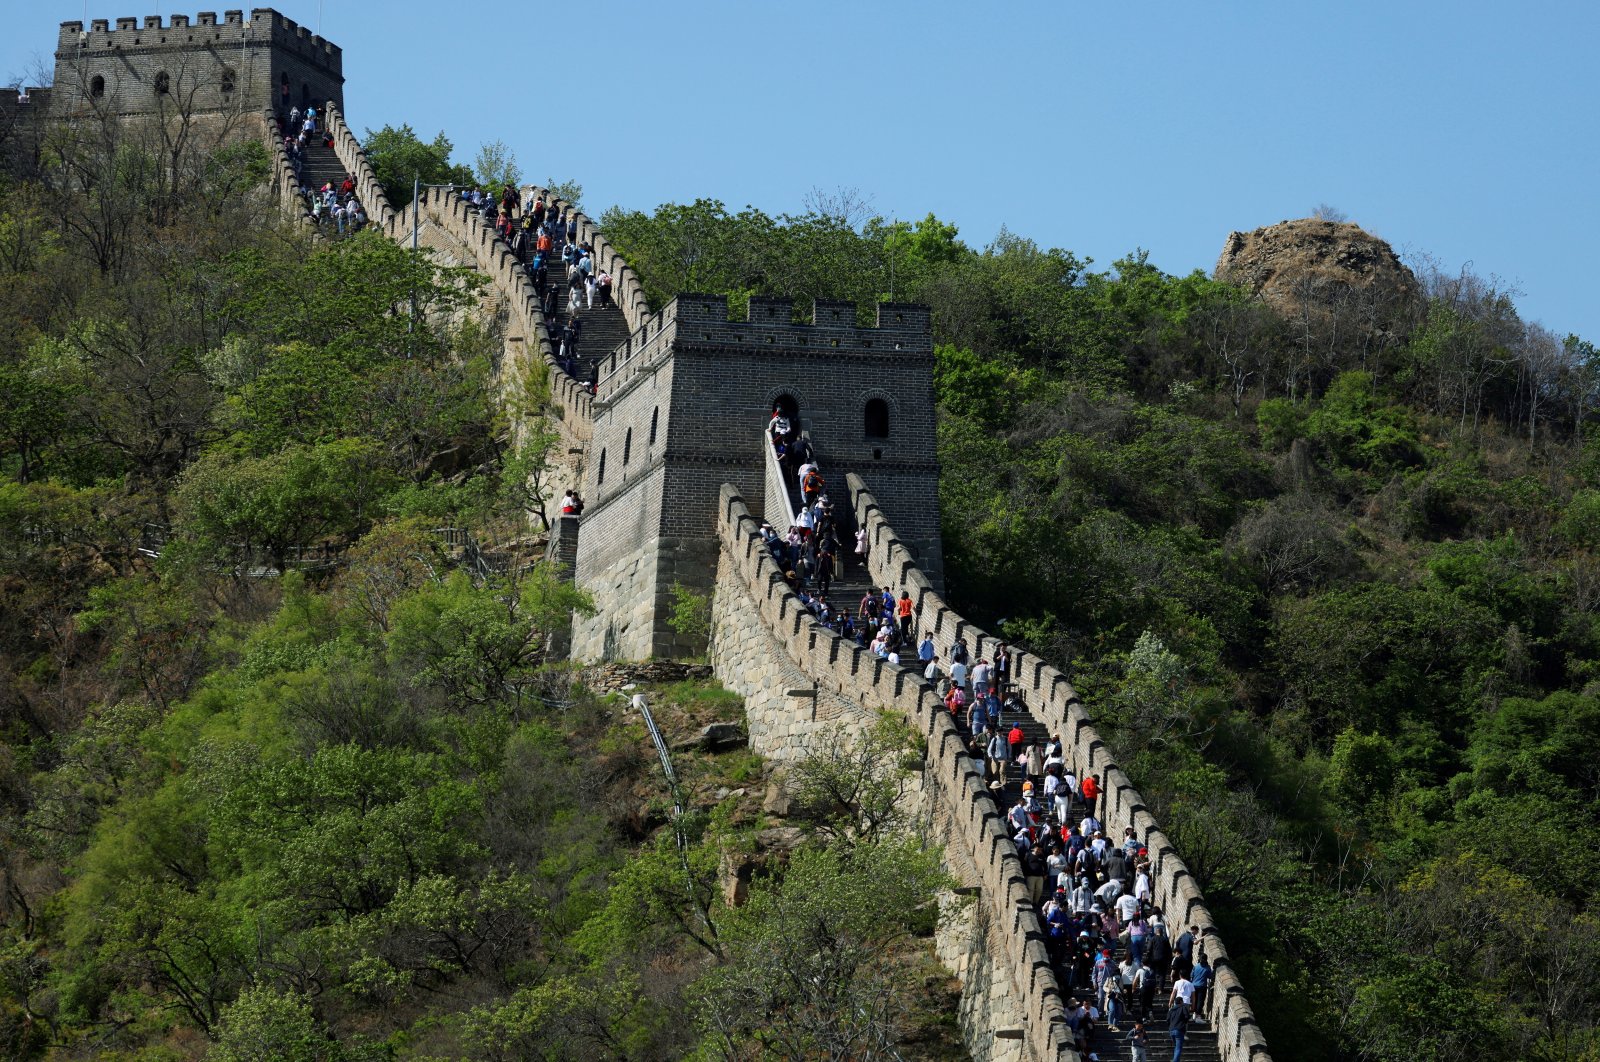 People visit the Mutianyu section of the Great Wall of China, Beijing, China, May 2, 2021. (Reuters Photo)